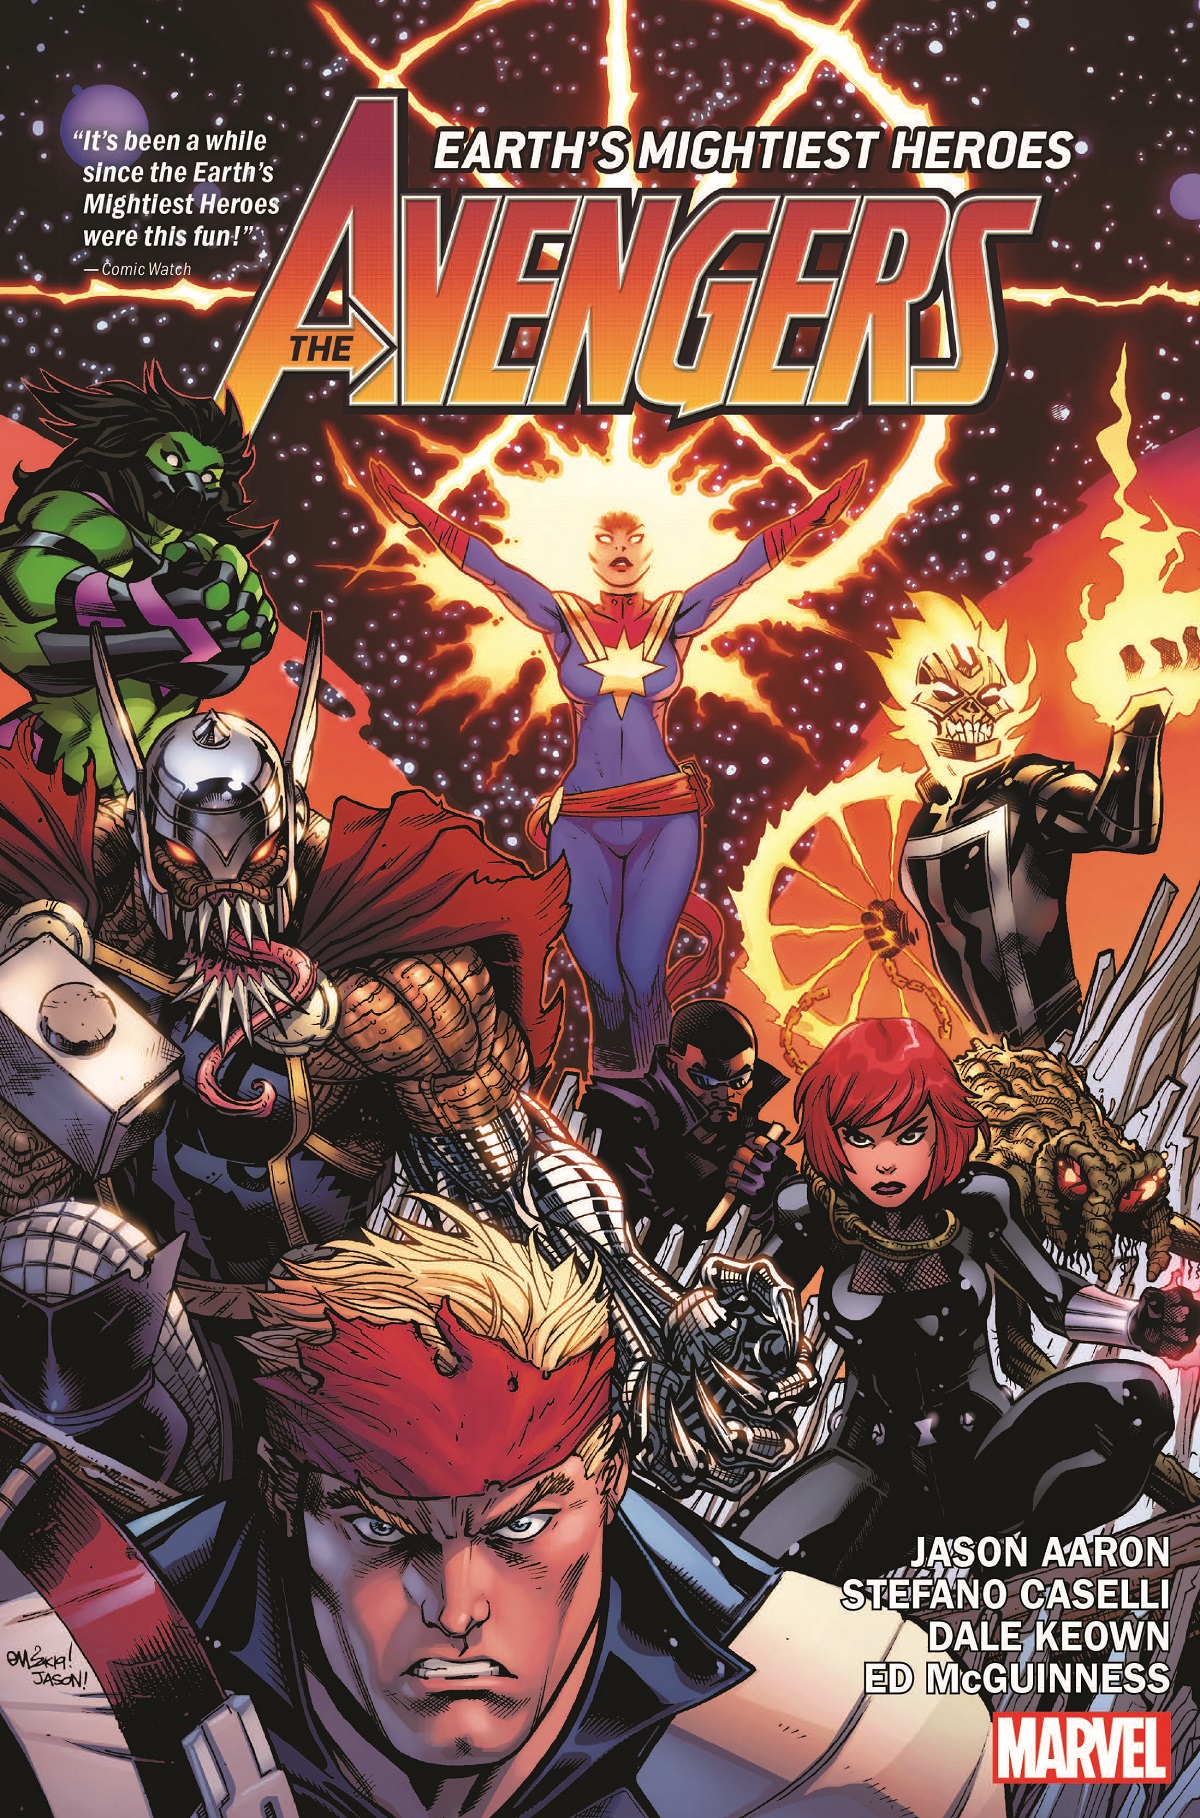 Avengers By Jason Aaron Vol. 3 (Trade Paperback)